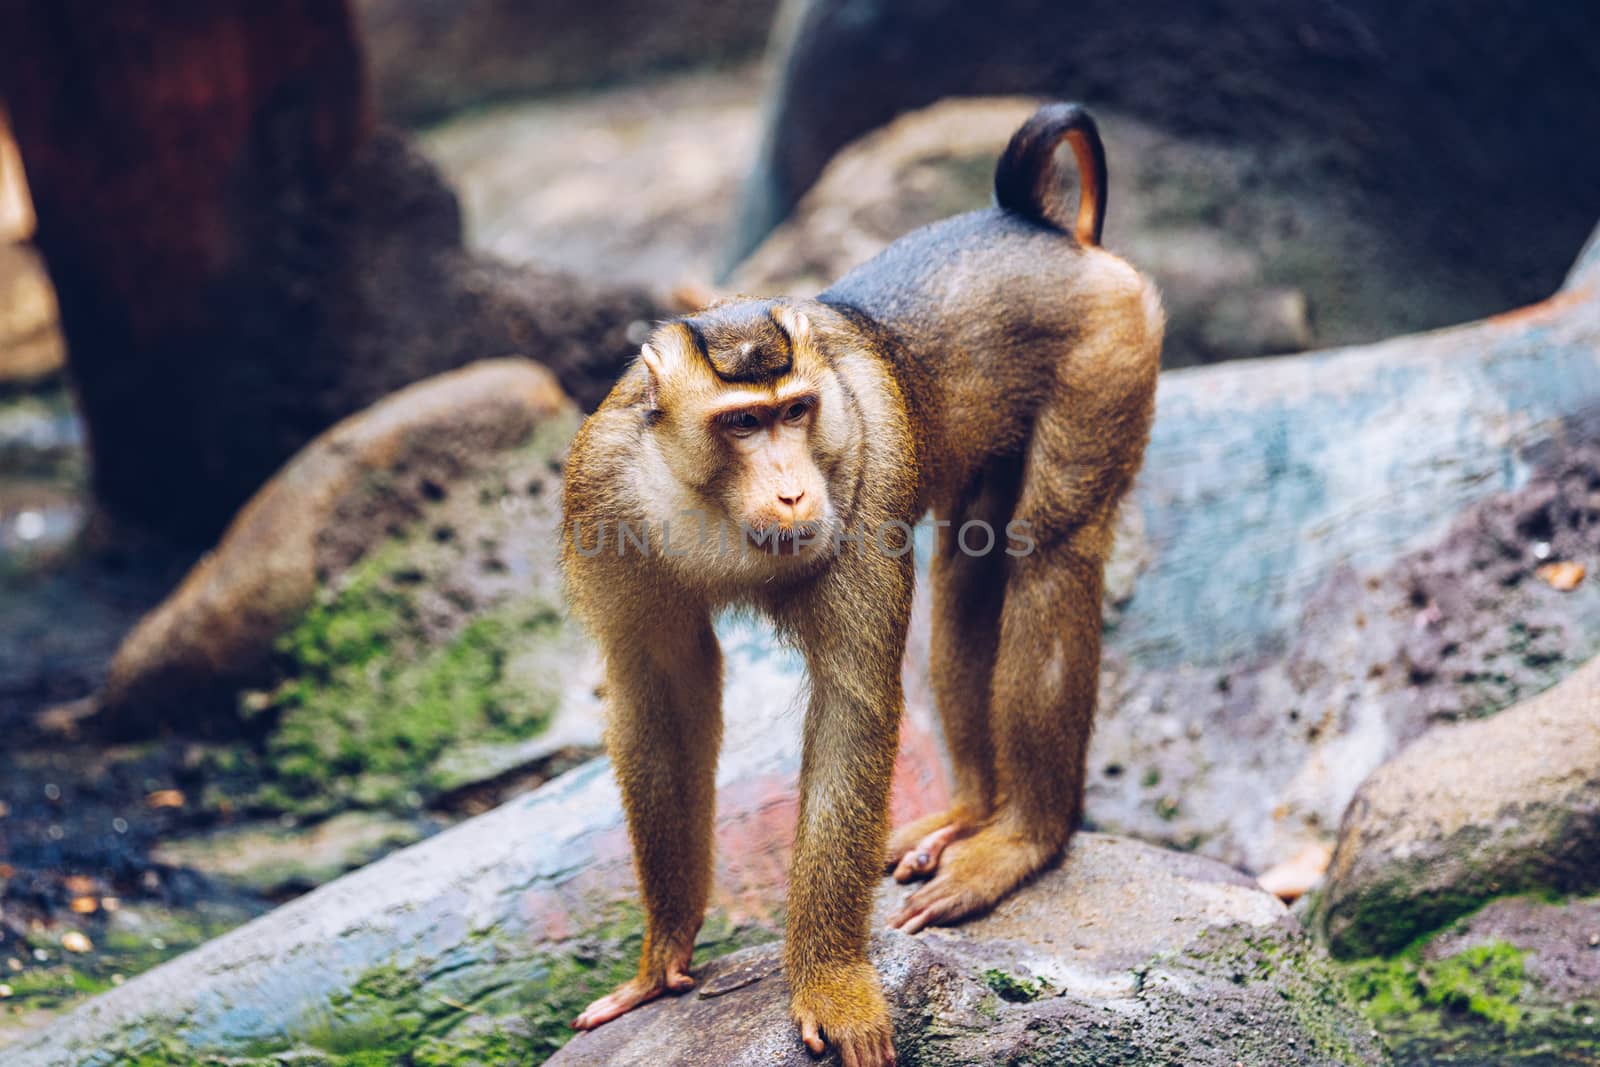 Southern Pig-tailed Macaque (Sundaland pigtail macaque or Sunda  by DaLiu